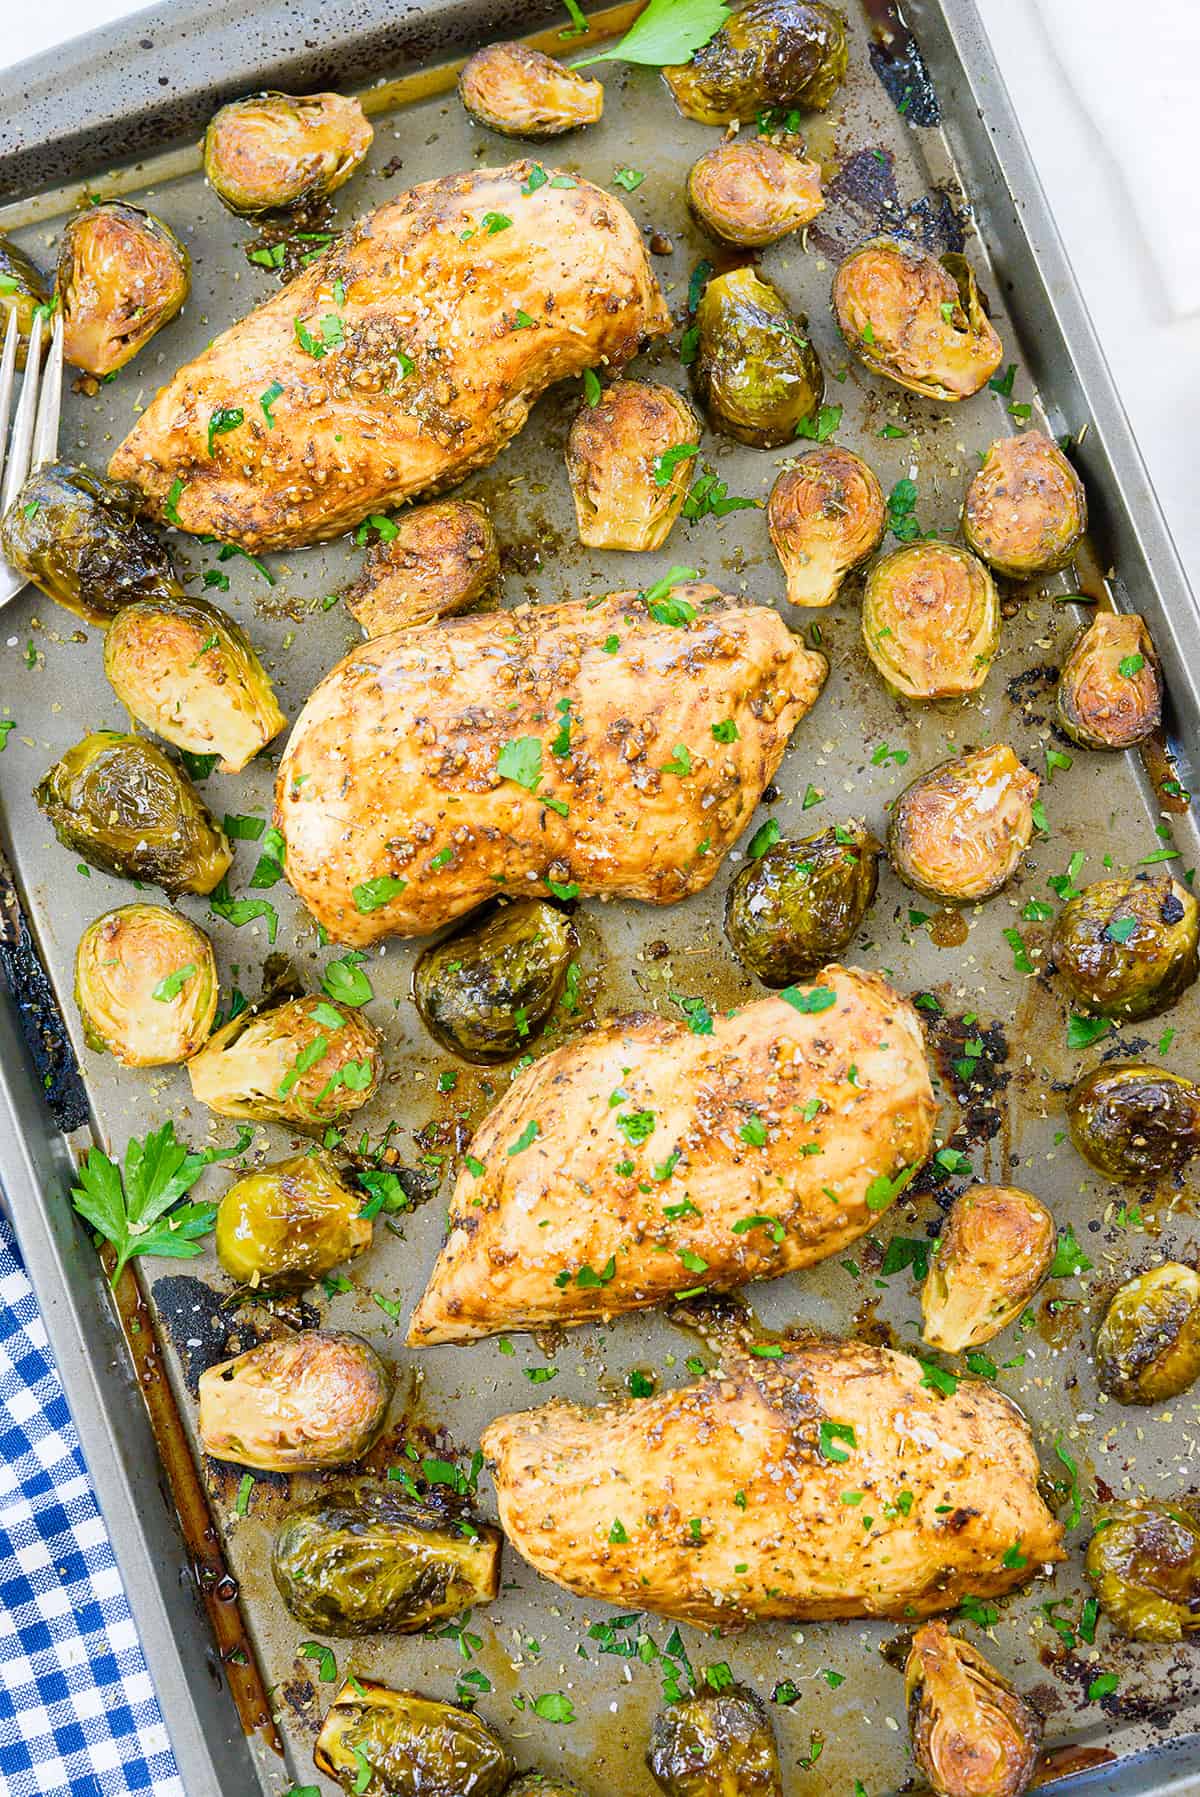 Overhead view of Brussels sprouts and chicken on sheet pan.